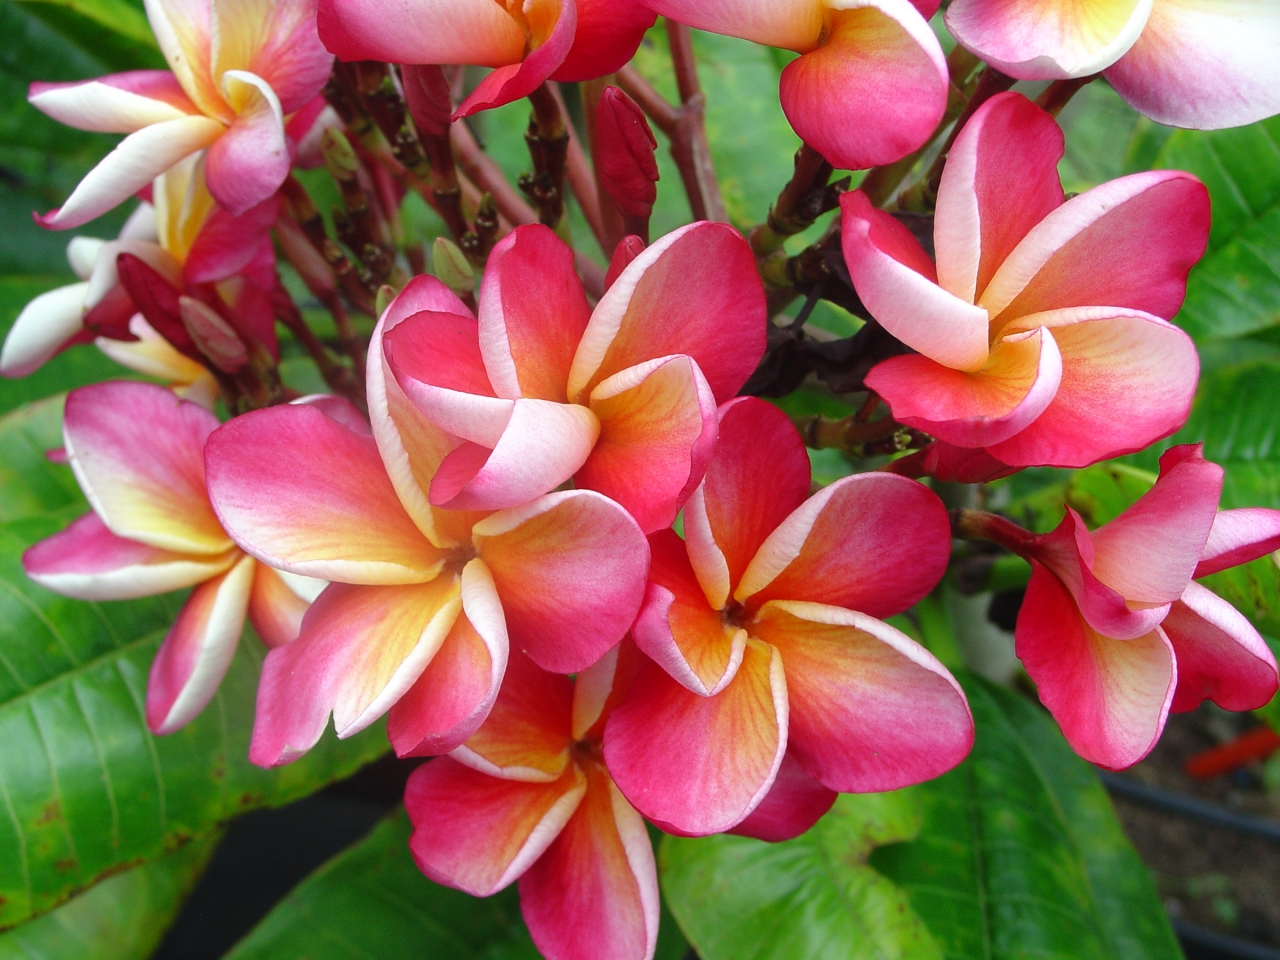 Images tagged "plumeria" .